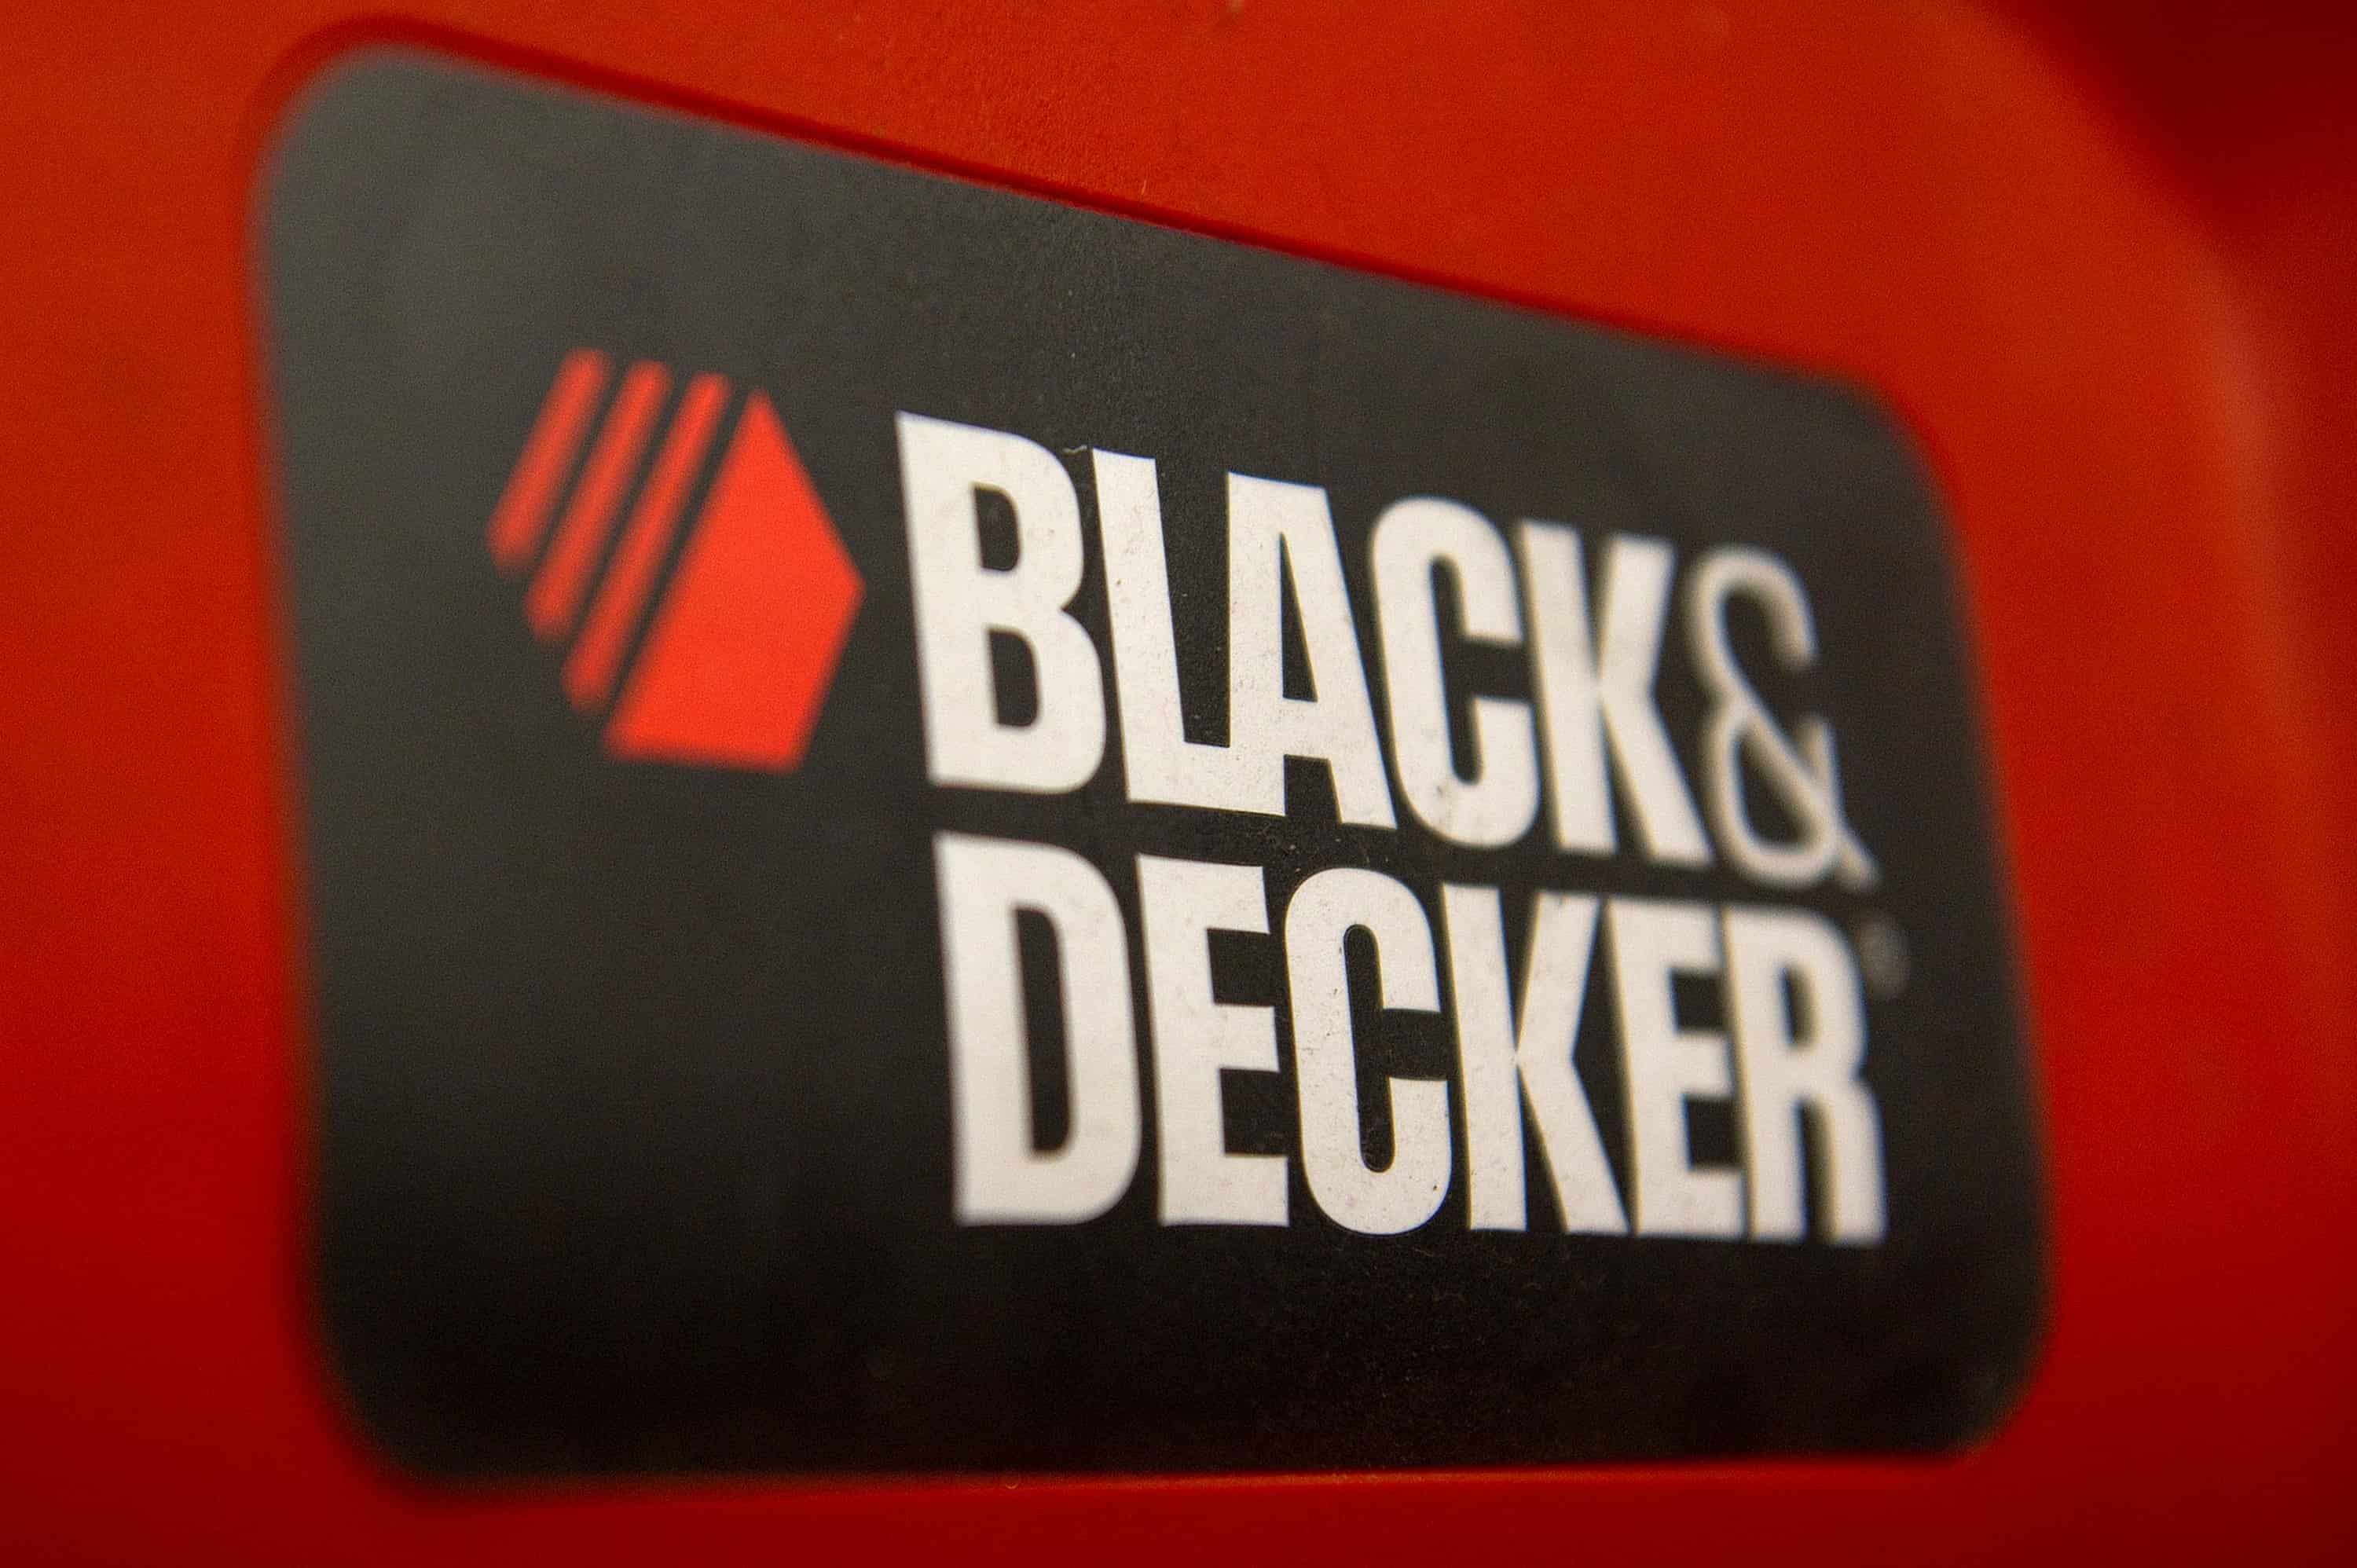 Stanley Black & Decker Mergers and Acquisitions Summary